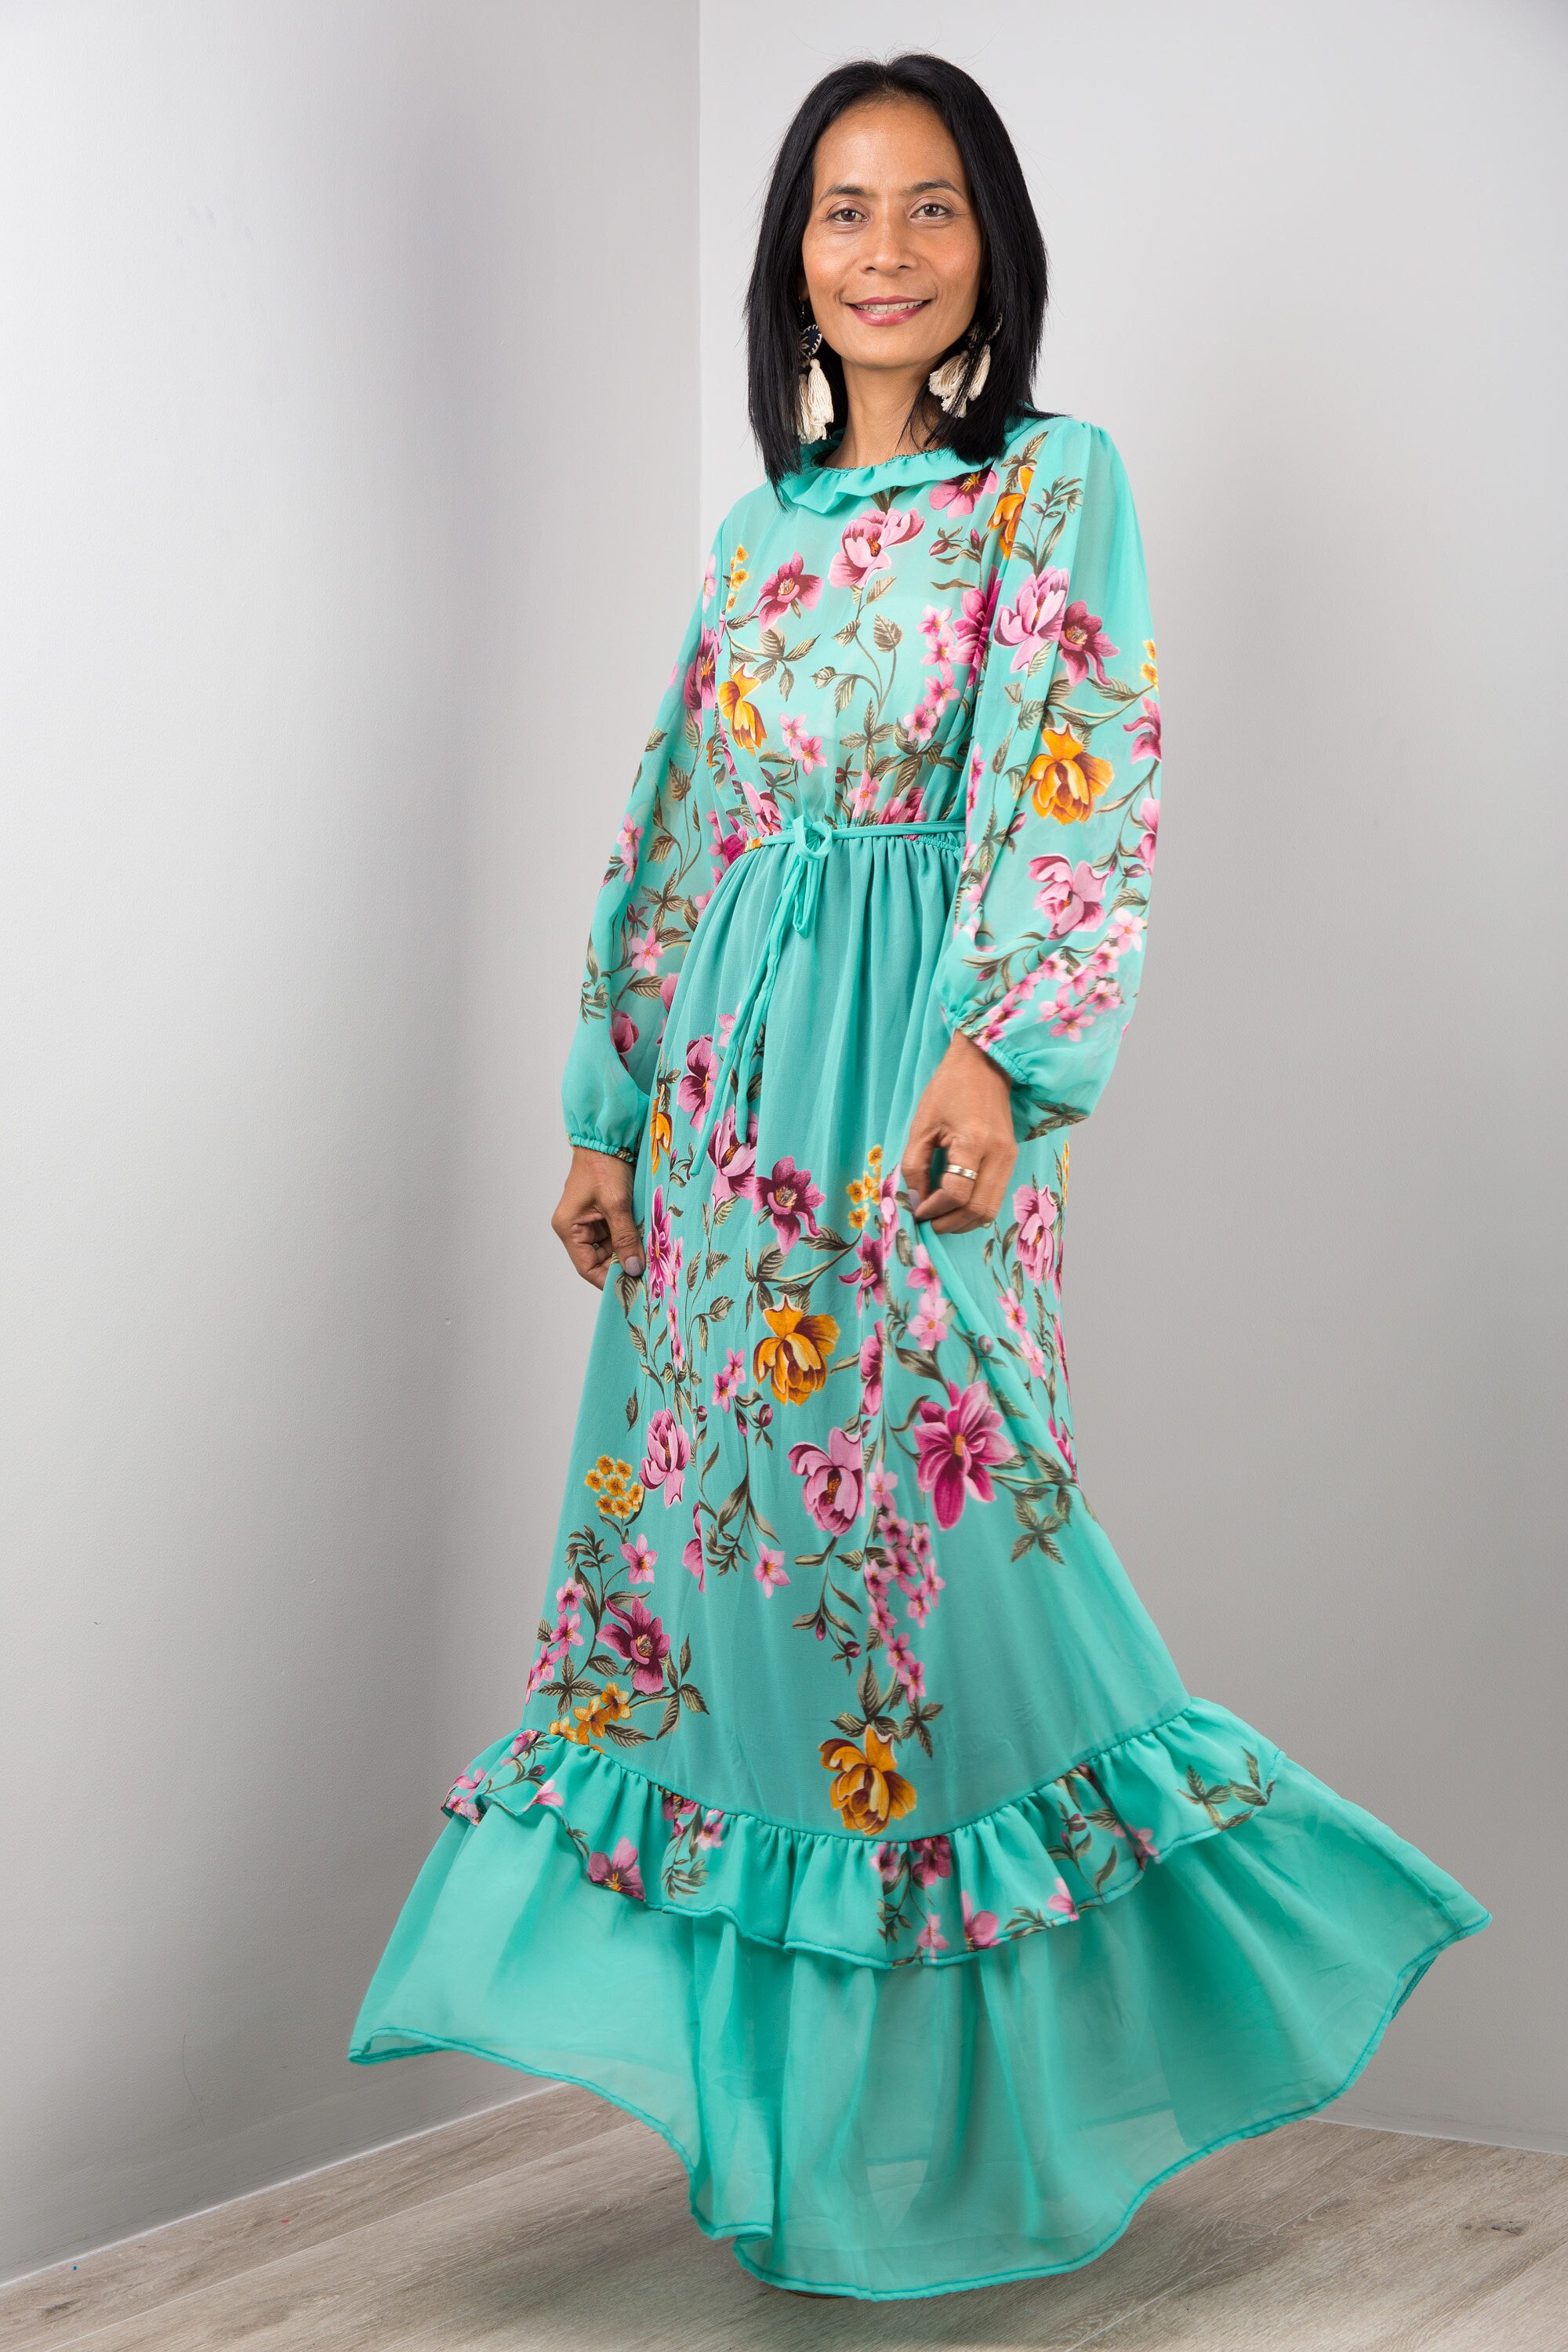 Floral Chiffon Maxi Dress Long Sleeves Modest Gown Dress With